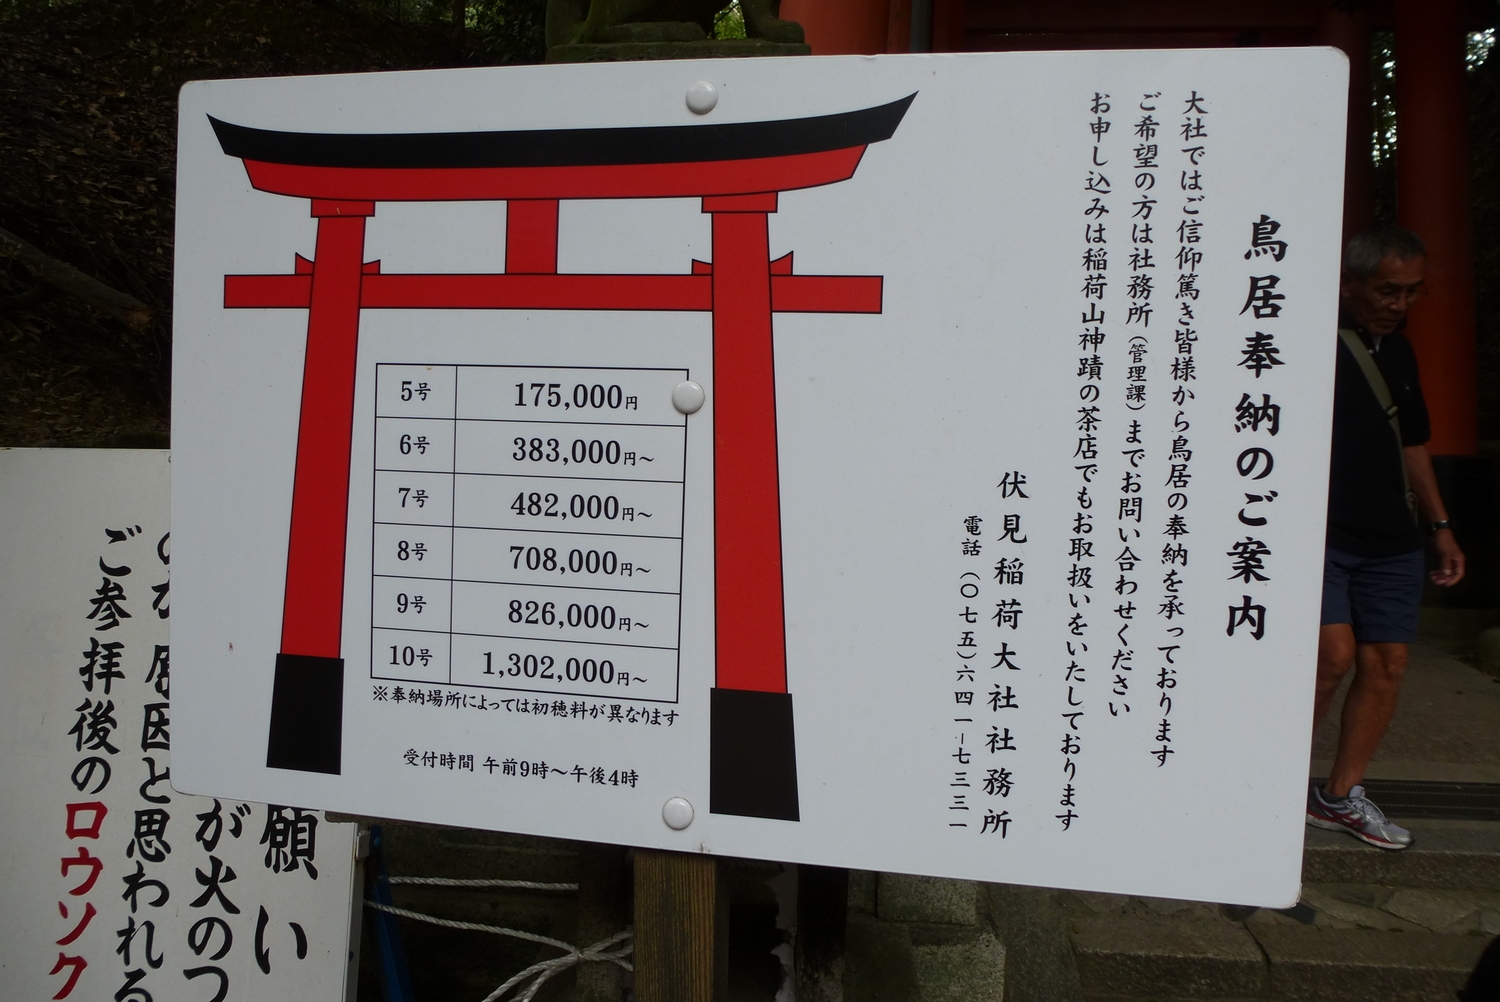 Price list to buy a torii gate at the shrine